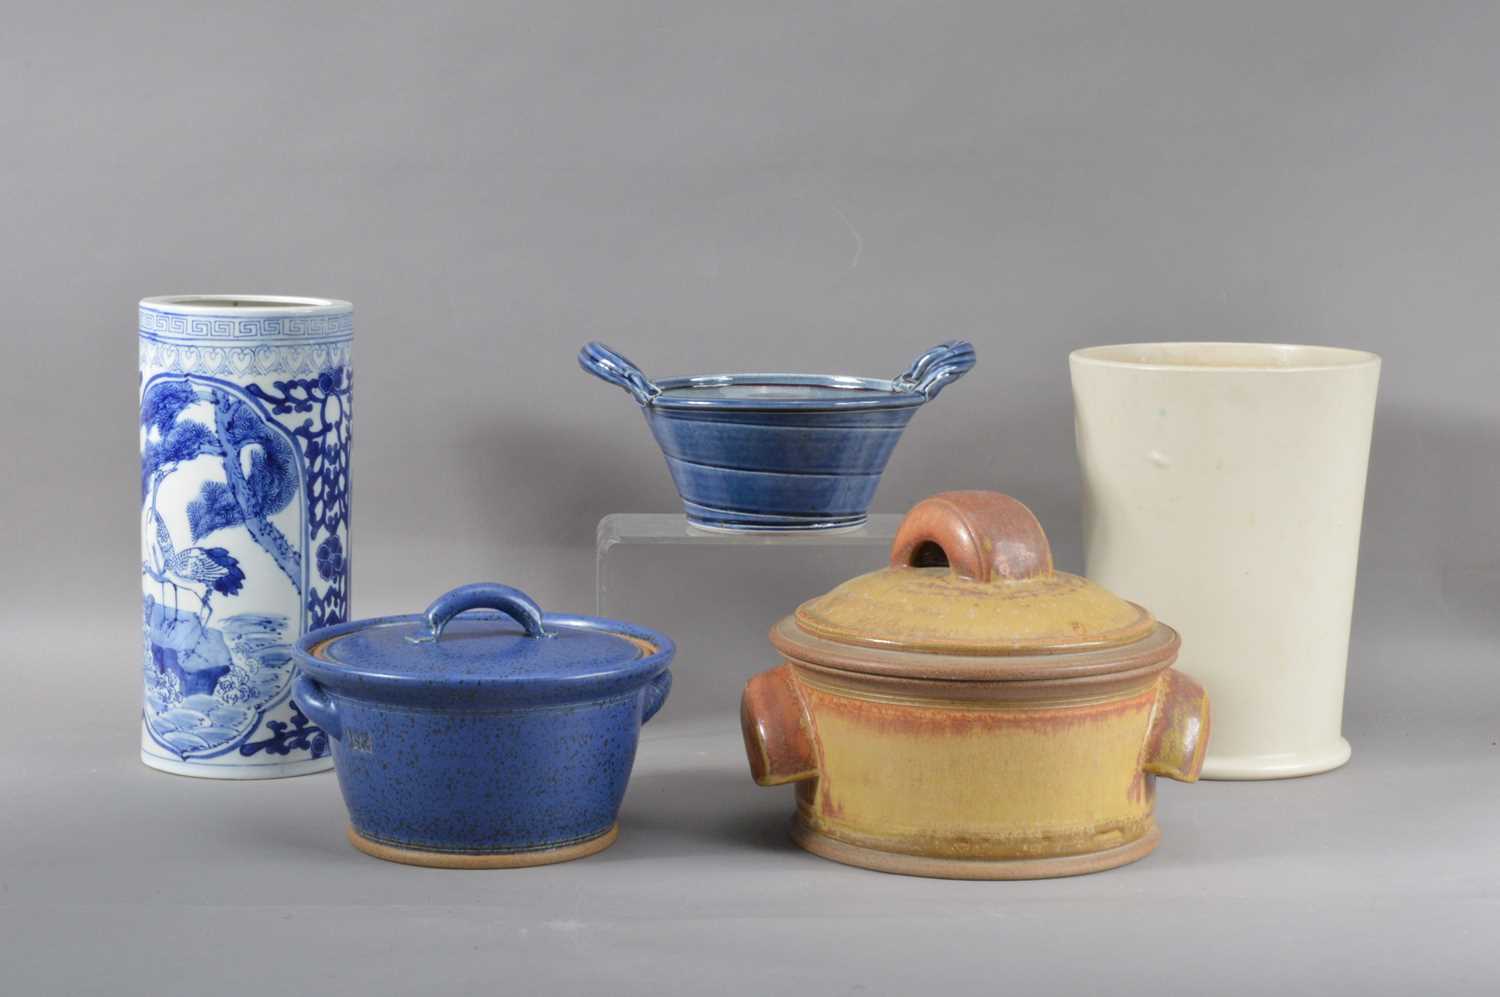 A collection of assorted ceramics,